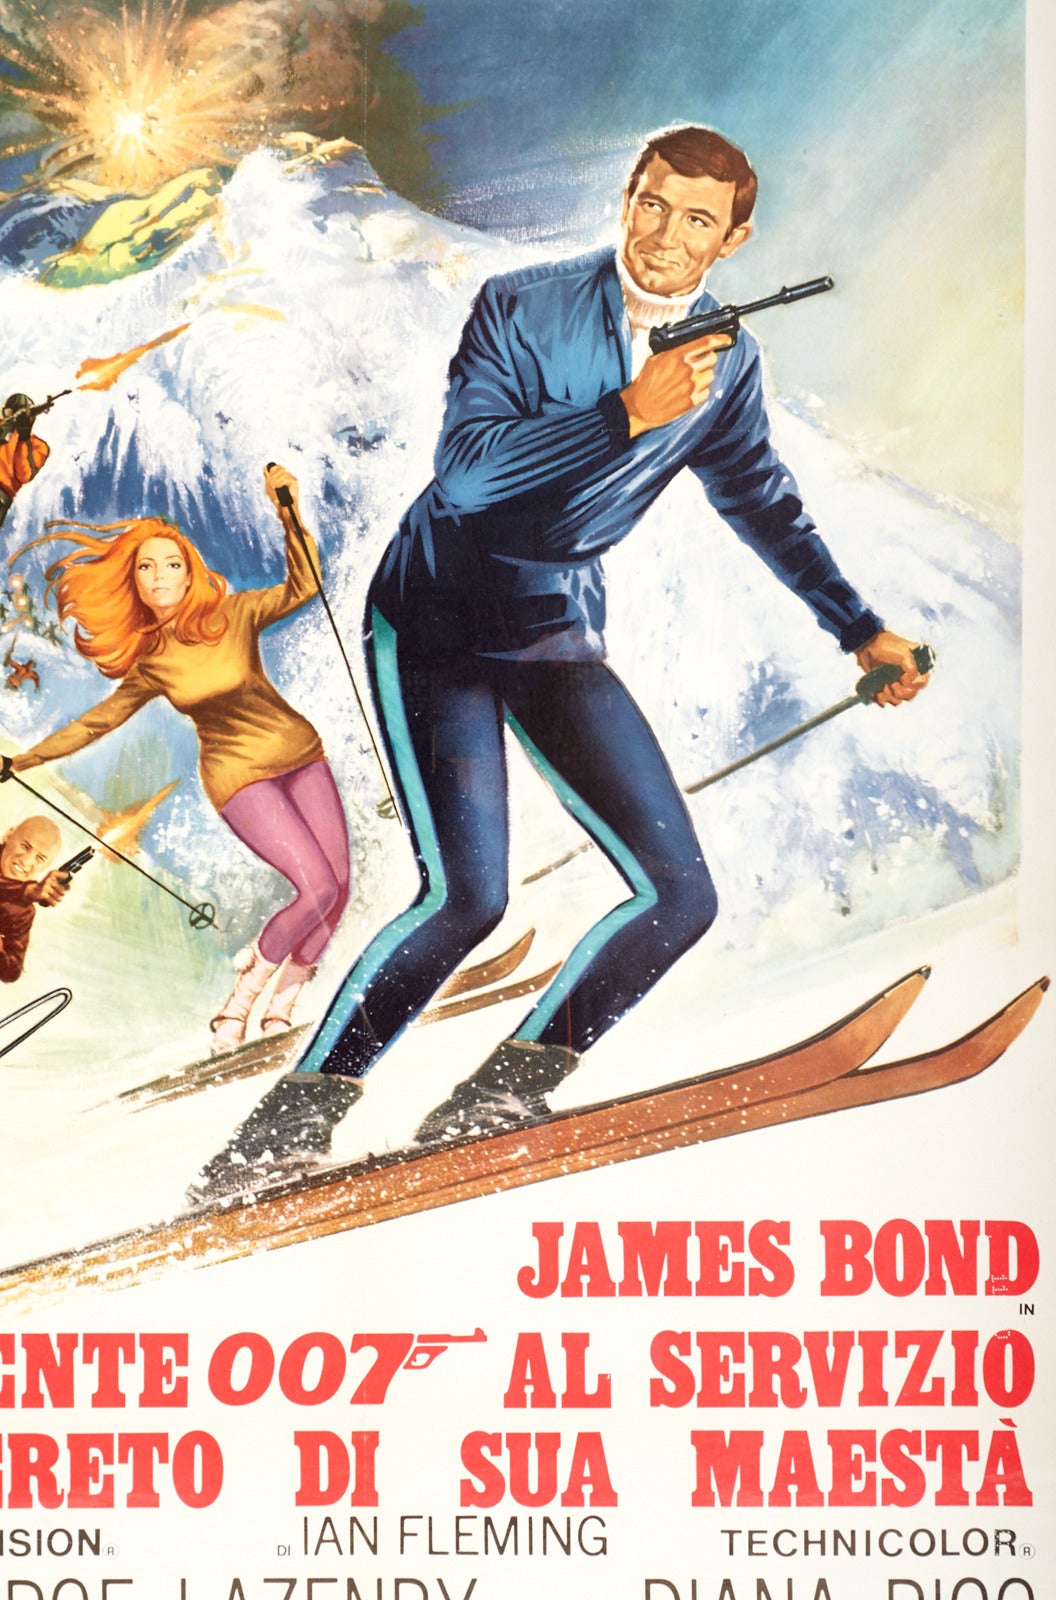 You are viewing a beautiful, vivid and original Italian movie poster from the iconic 1969 James Bond film, 